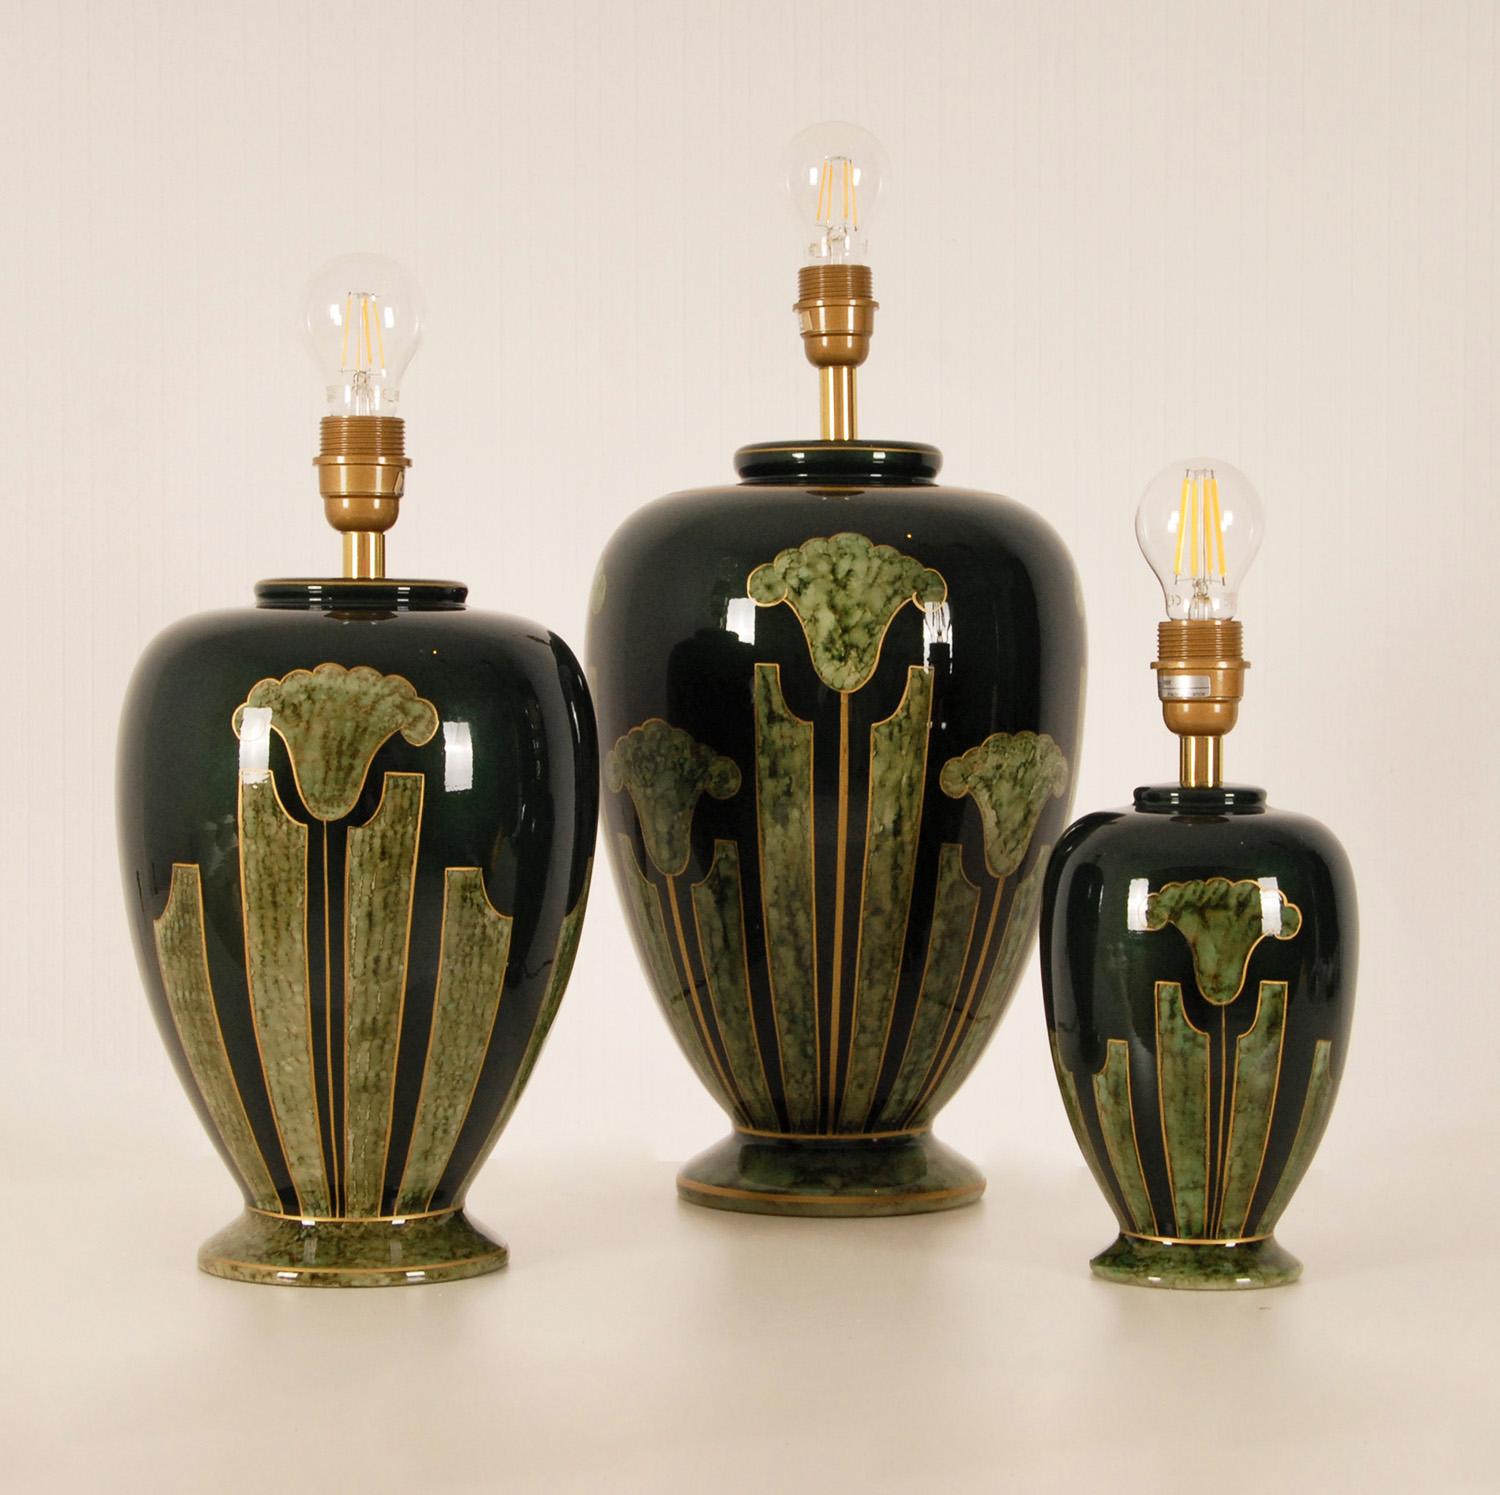 Vintage French Ceramic Green and Gold Table Lamps Marble Metallic, Set of 3 In Good Condition For Sale In Wommelgem, VAN